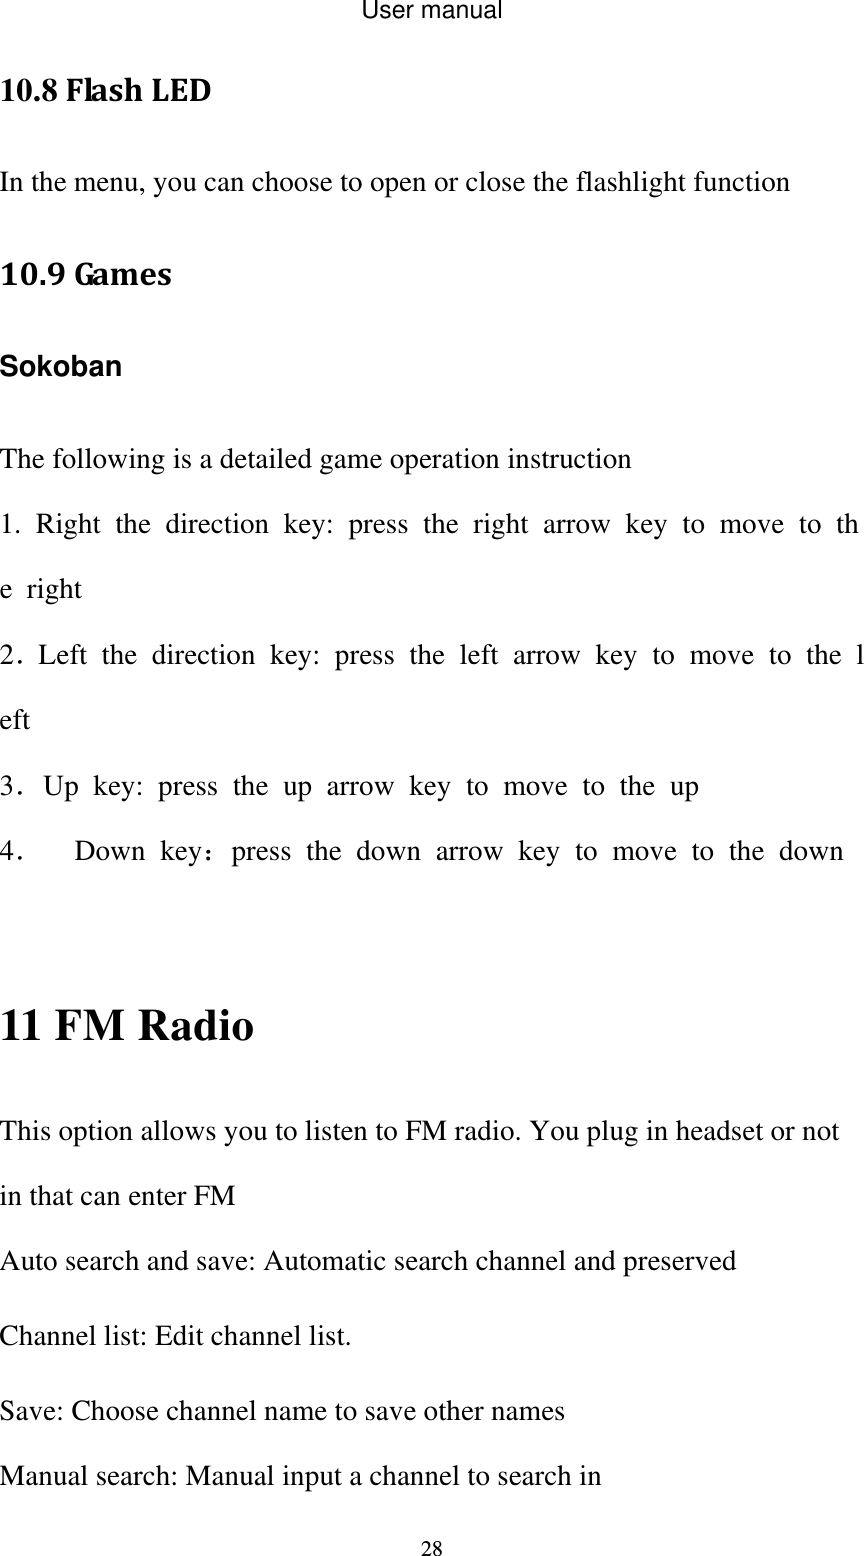 User manual  2810.8FlashLEDIn the menu, you can choose to open or close the flashlight function 10.9Ga m e s SokobanThe following is a detailed game operation instruction 1. Right the direction key: press the right arrow key to move to the right 2．Left the direction key: press the left arrow key to move to the left 3．Up key: press the up arrow key to move to the up 4． Down key：press the down arrow key to move to the down   11 FM Radio This option allows you to listen to FM radio. You plug in headset or not in that can enter FM Auto search and save: Automatic search channel and preserved Channel list: Edit channel list. Save: Choose channel name to save other names Manual search: Manual input a channel to search in 